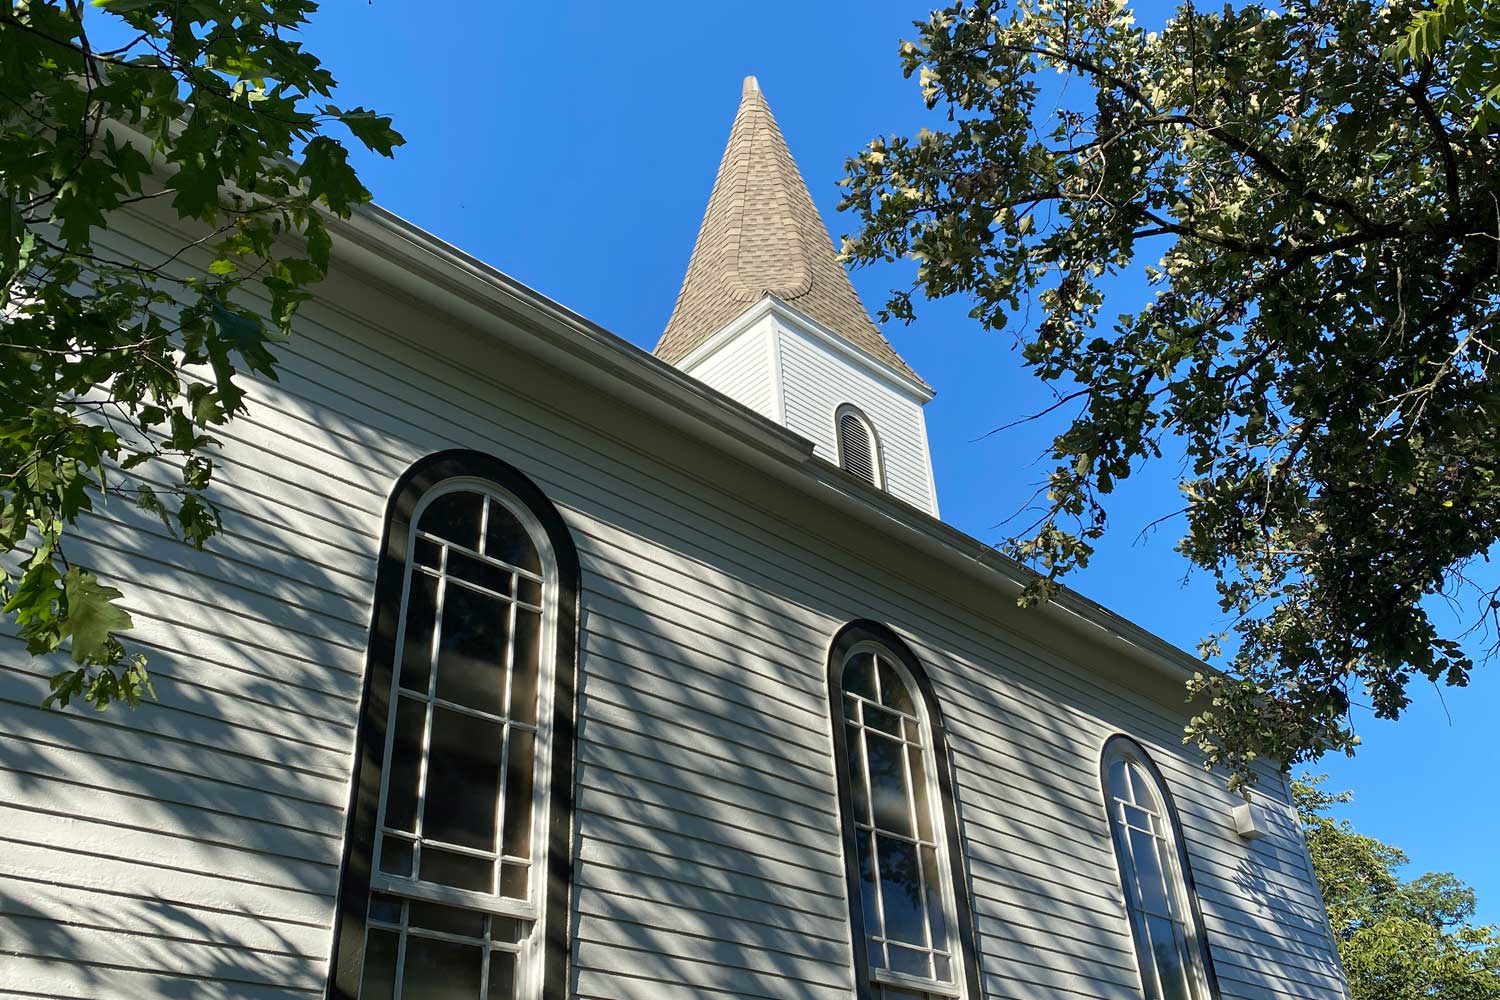 A closeup view on an old church looking up at its steeple with trees in the foreground and blue sky in the background.